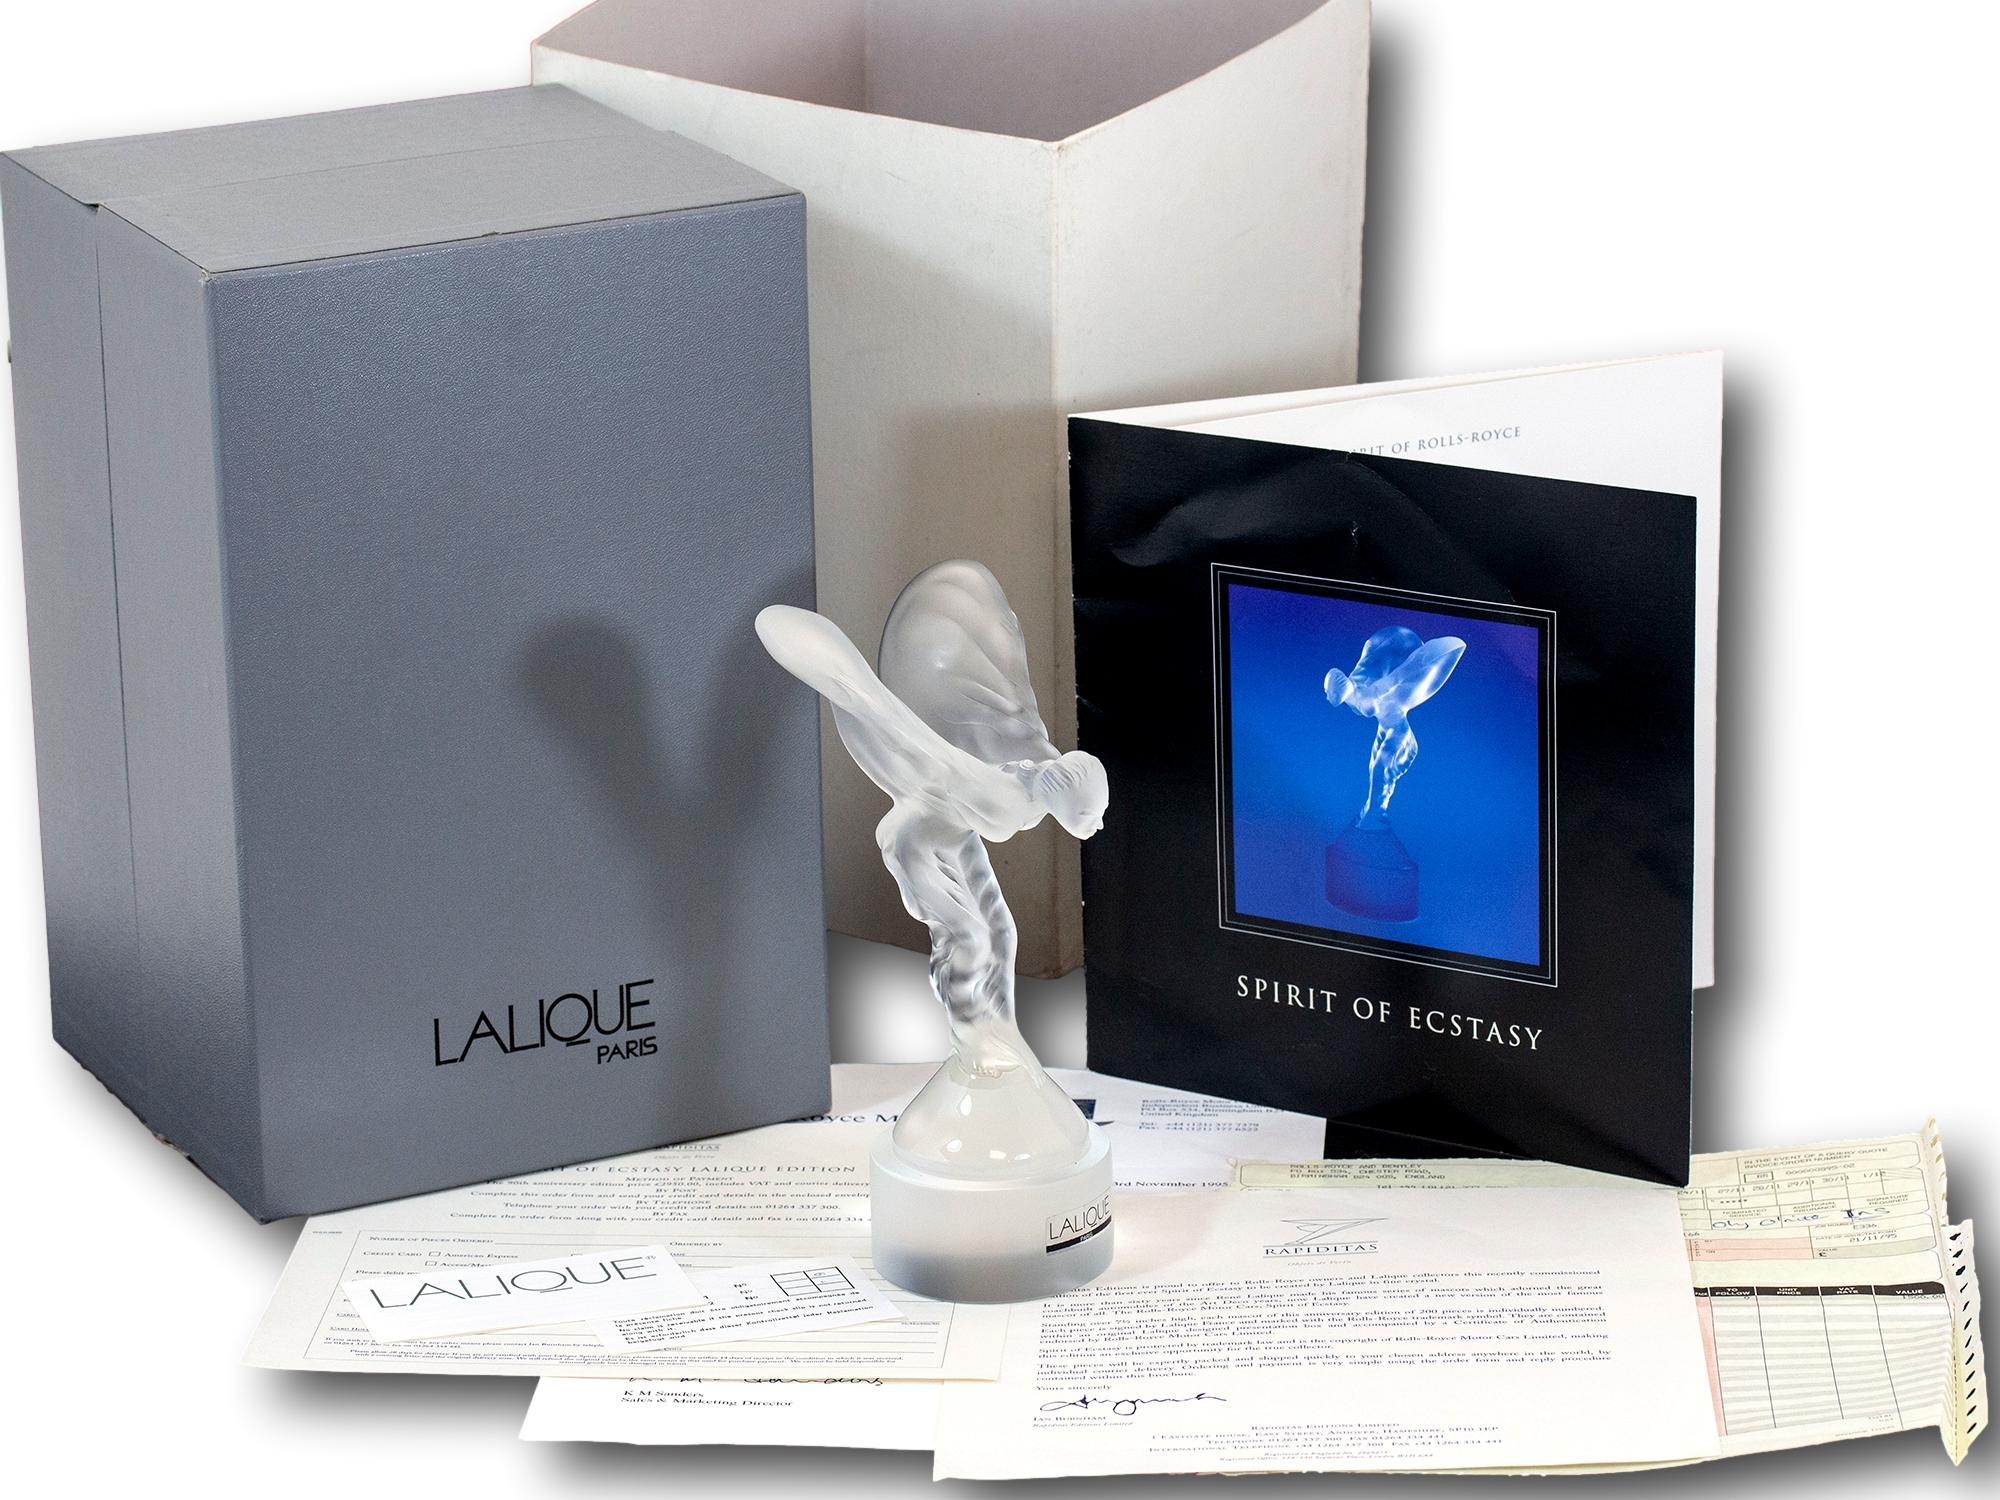 With Original Paperwork & Box 

From our Lalique collection, we are thrilled to offer this Rare Lalique Limited Edition Rolls Royce Spirit of Ecstasy Car Mascot. The mascot modelled as the original Spirit of Ecstasy designed by Charles Sykes Flying